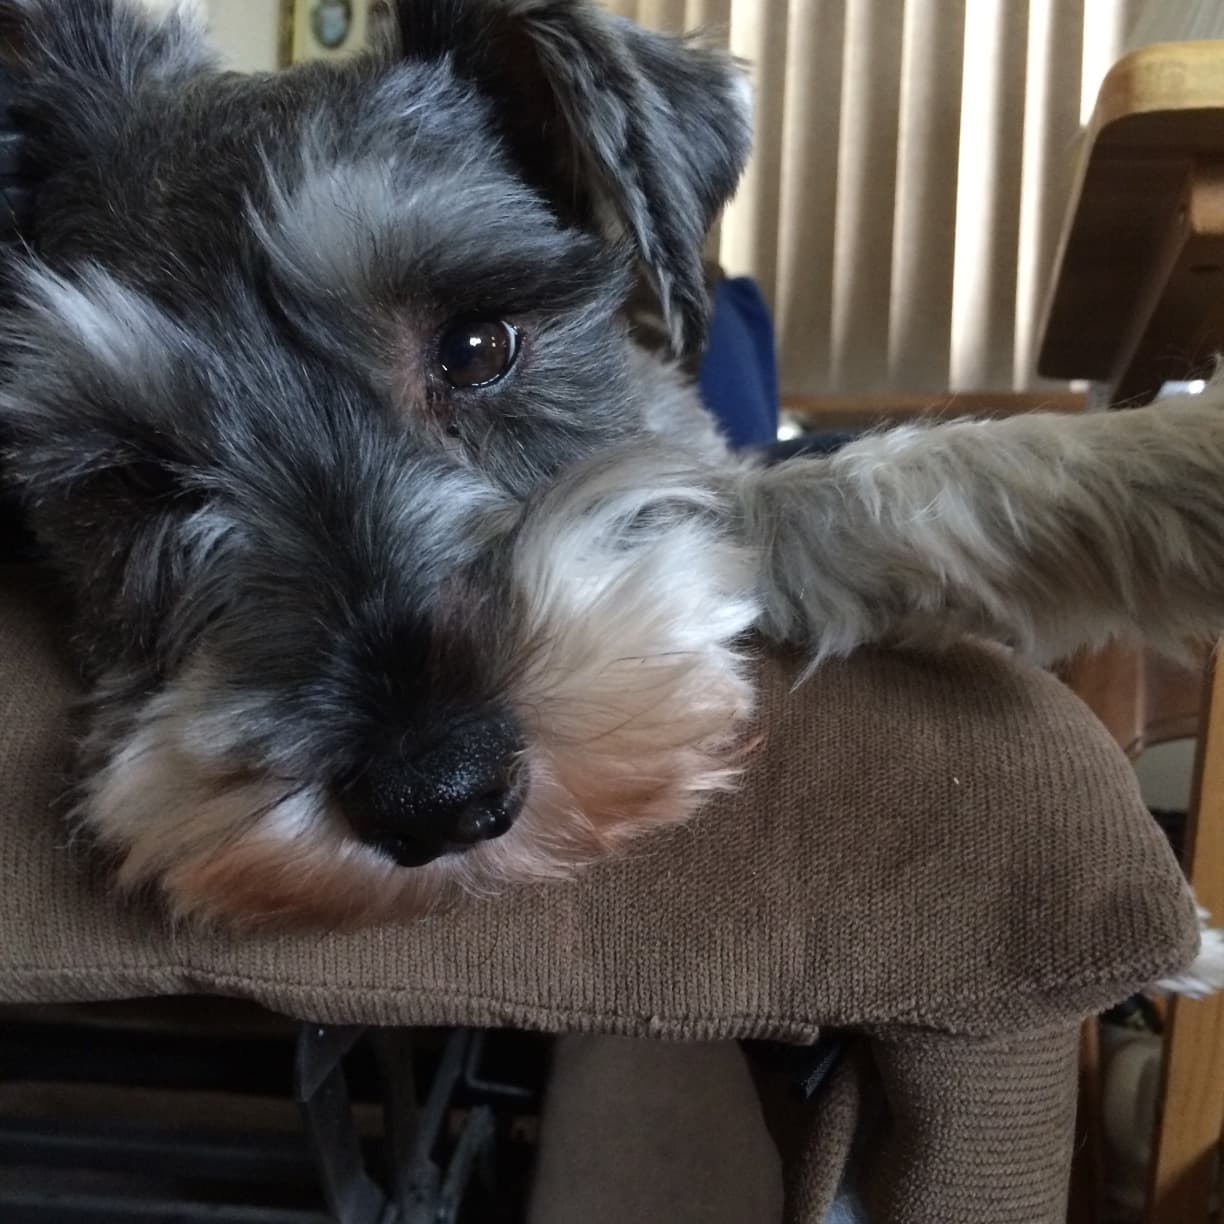 Scottie drooped over the arm of chair staring at me